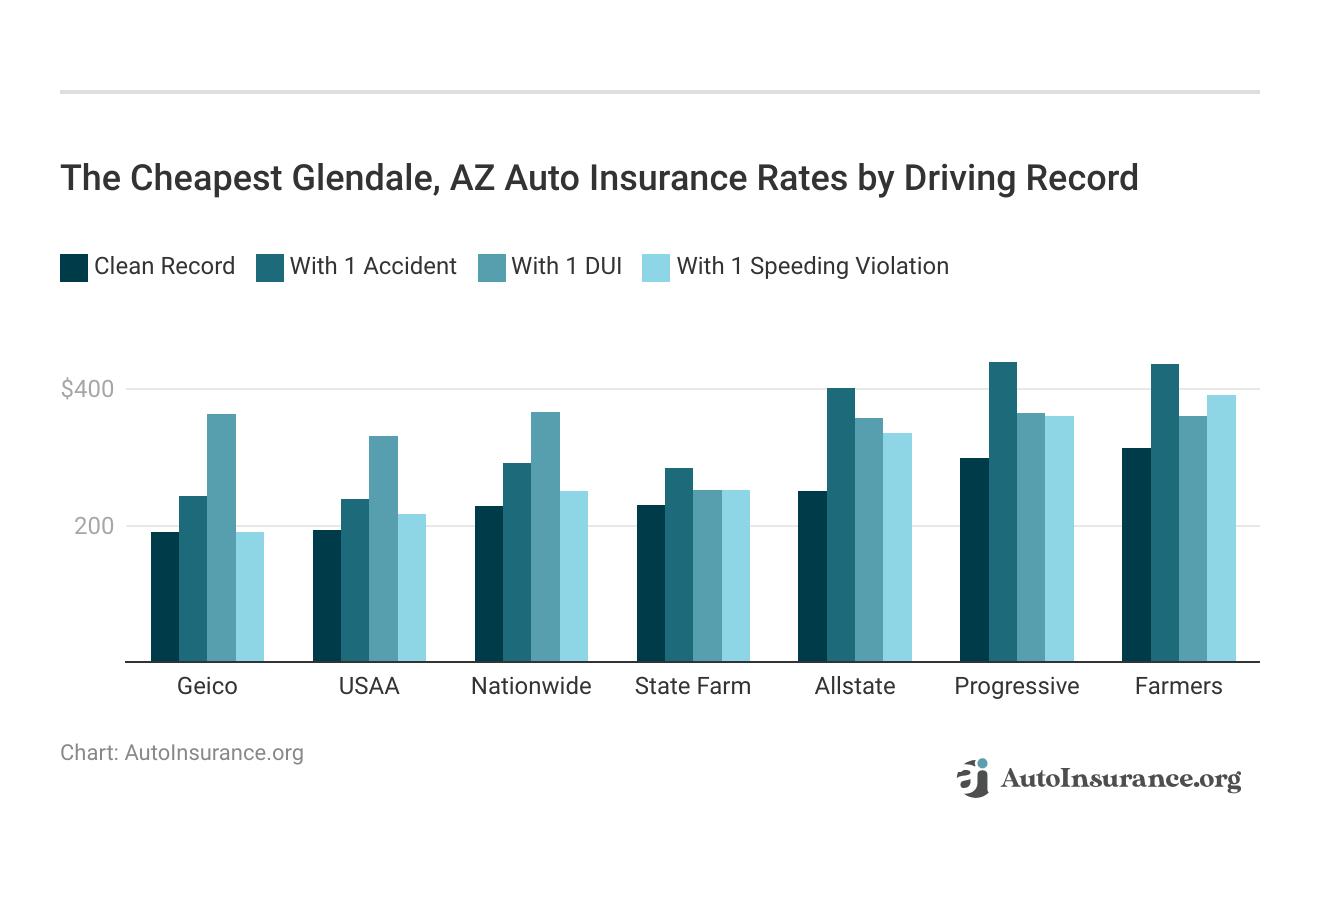 <h3>The Cheapest Glendale, AZ Auto Insurance Rates by Driving Record</h3>